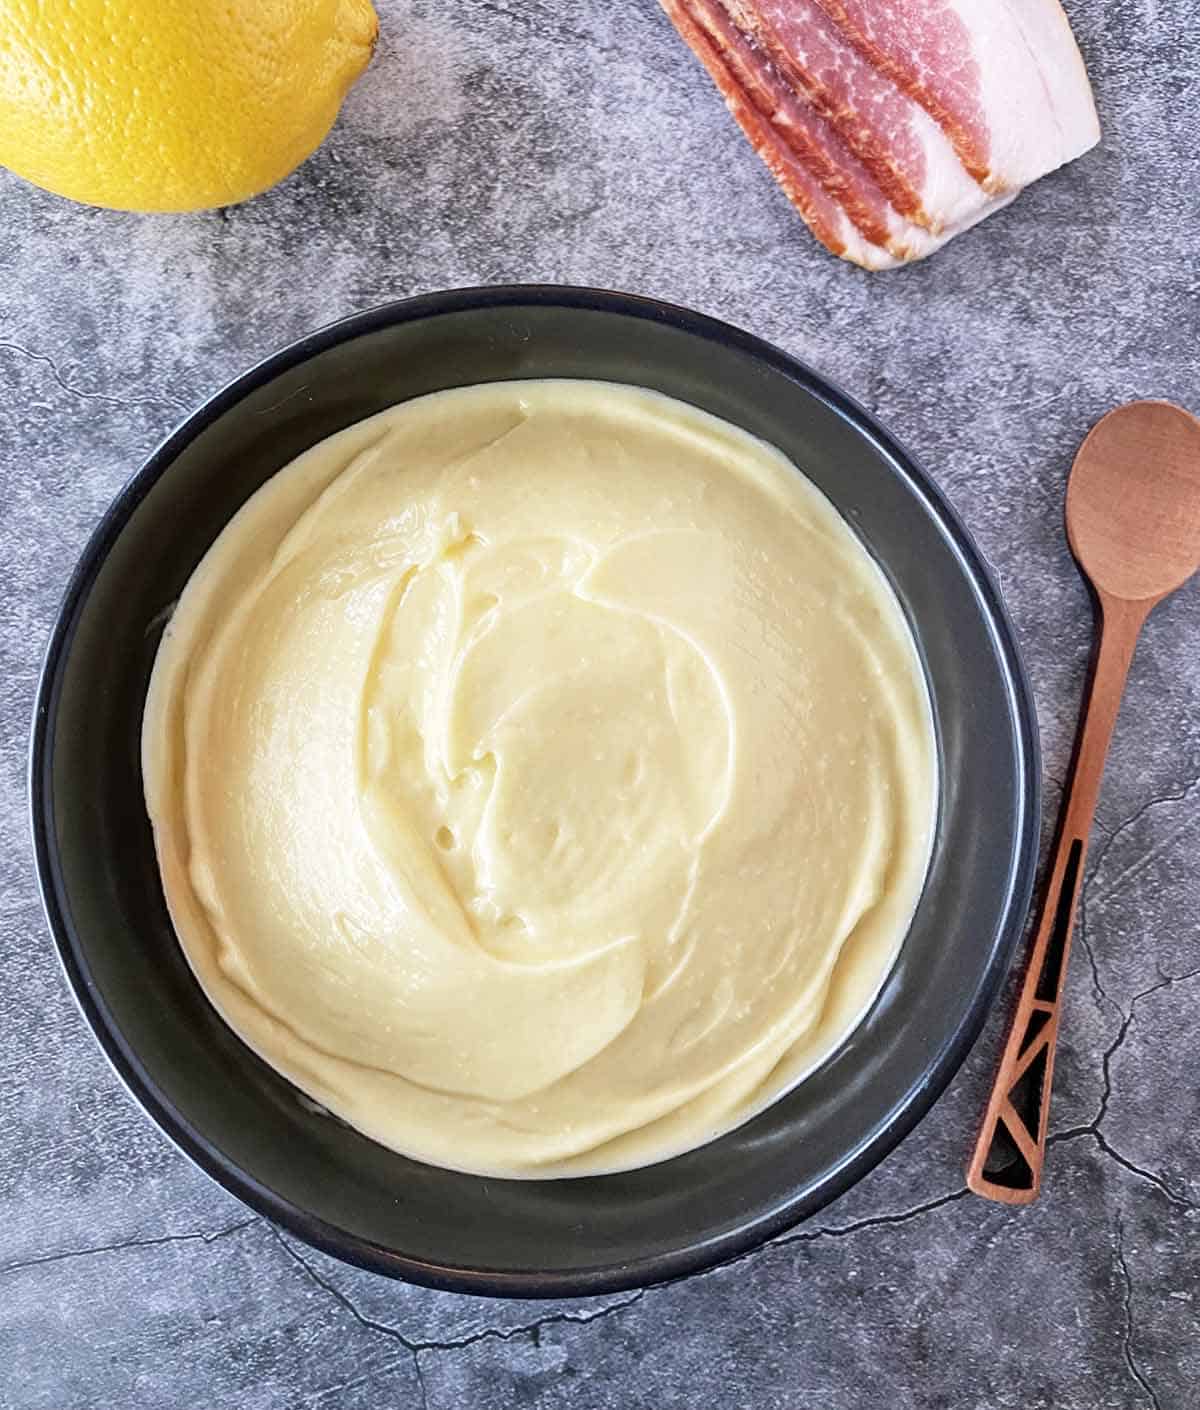 Bacon aioli spread in a black serving bowl with a wooden serving spoon nearby.